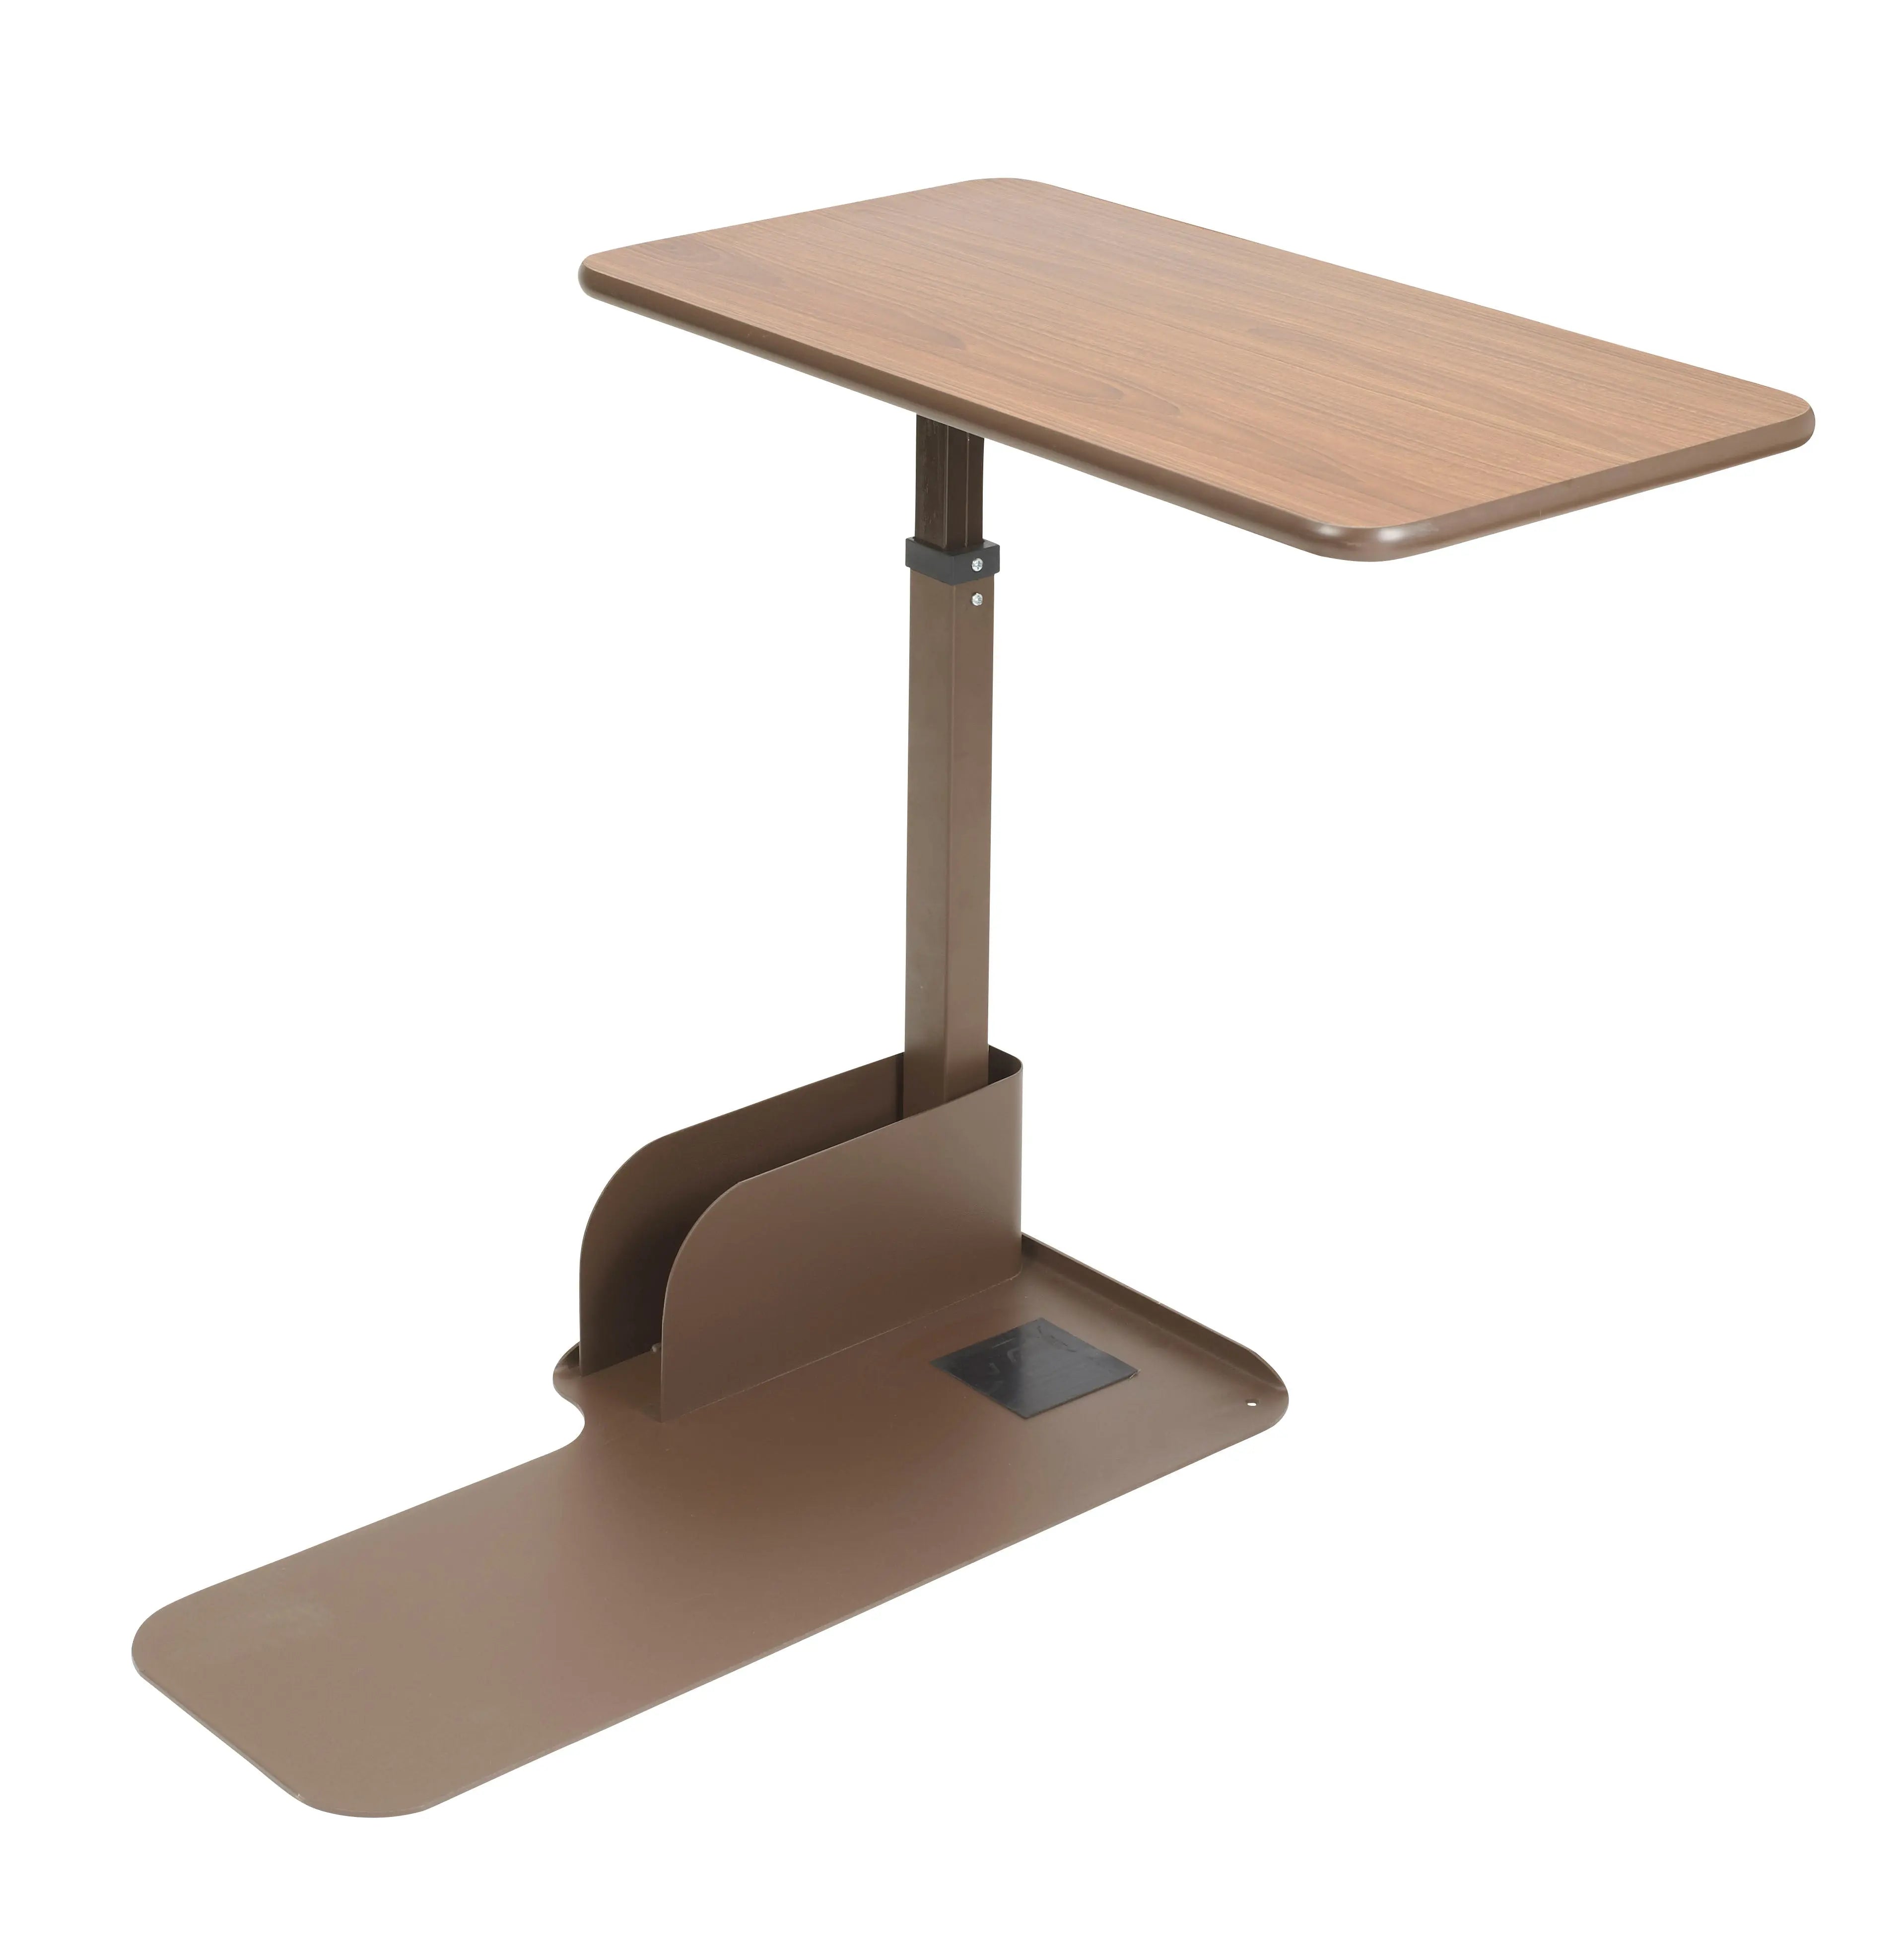 Seat Lift Chair Overbed Table - Home Health Store Inc